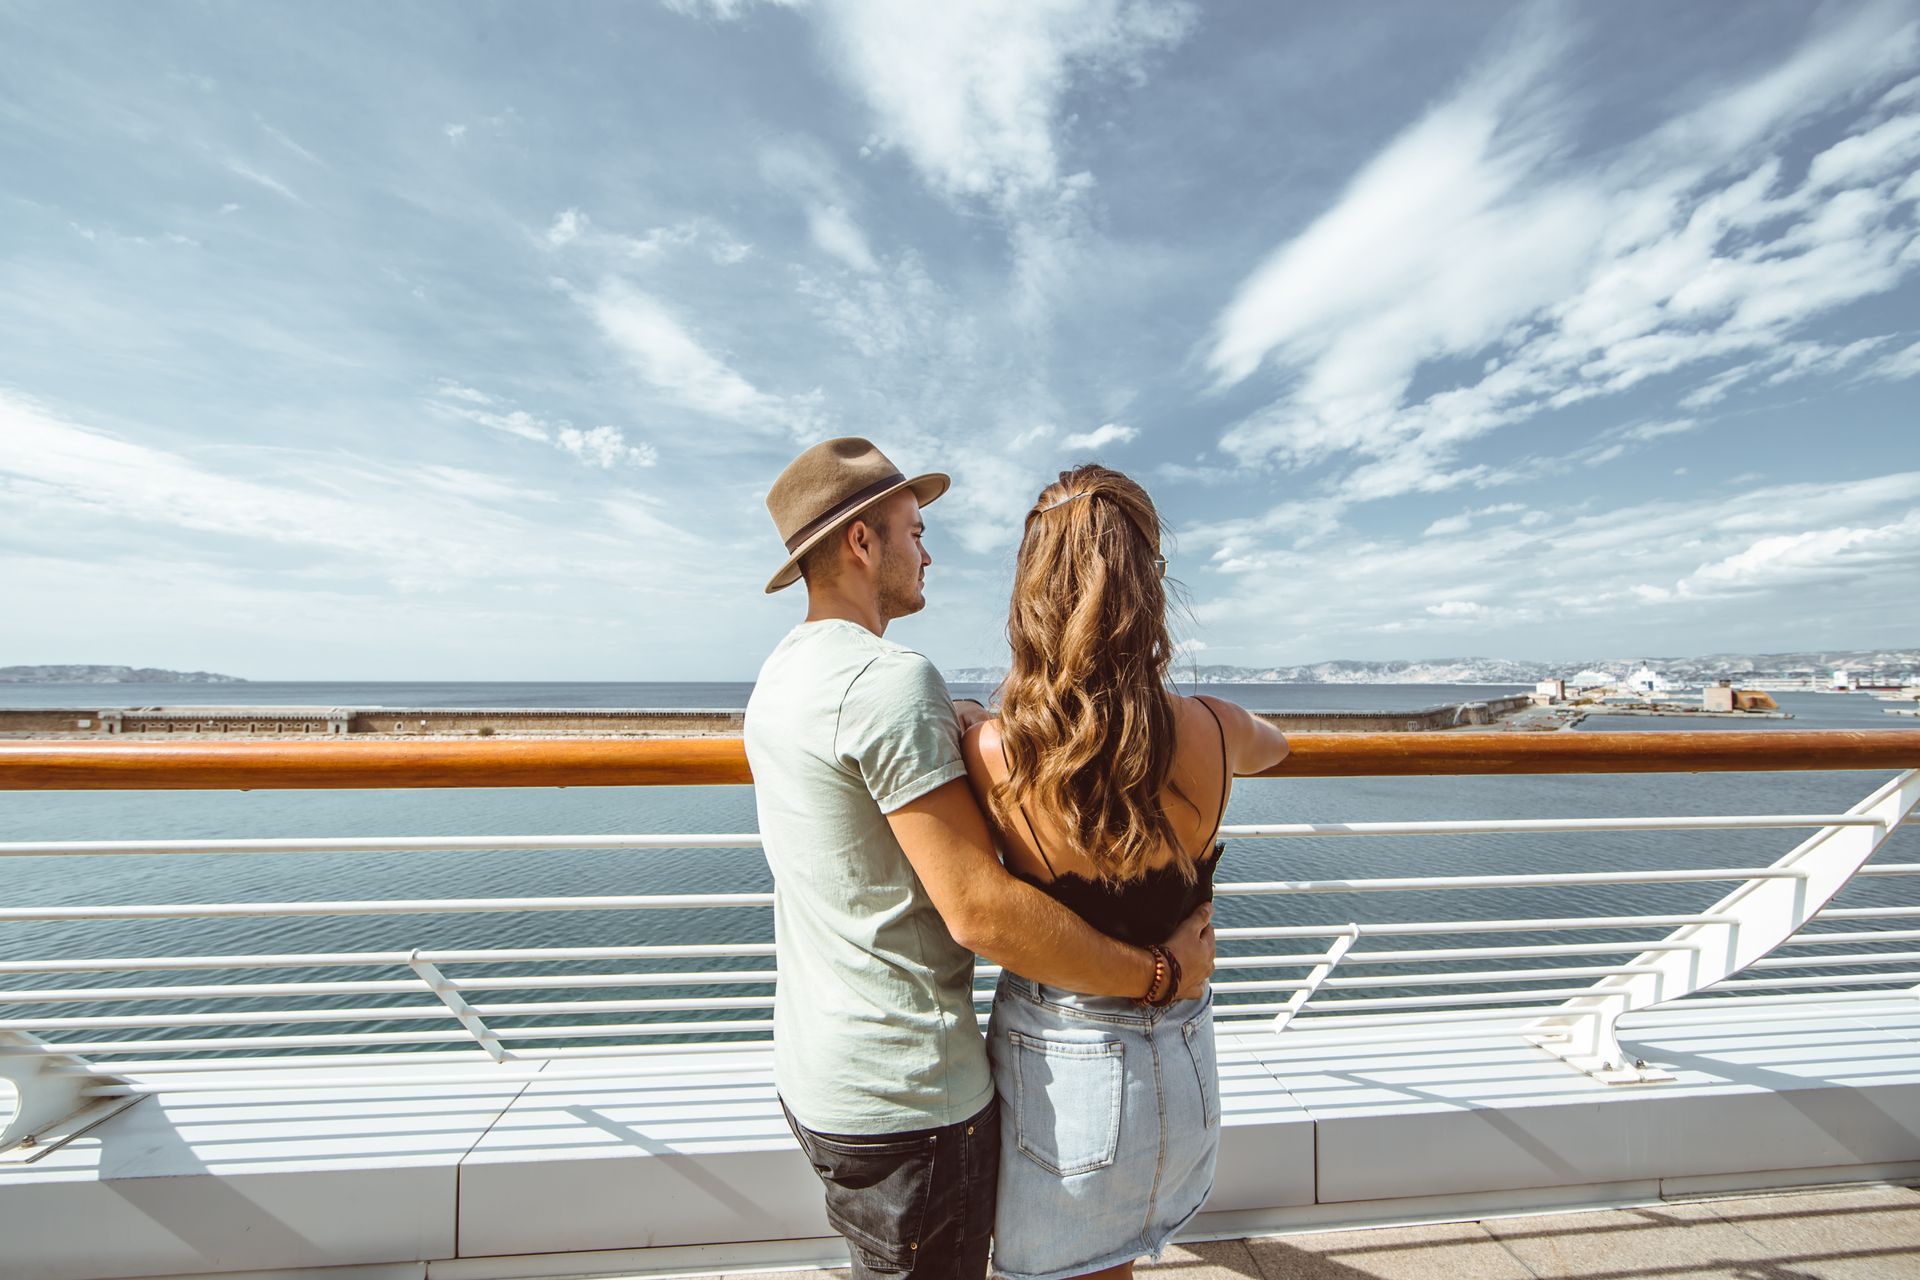 a man and a woman are standing on a cruise ship looking out over the ocean .